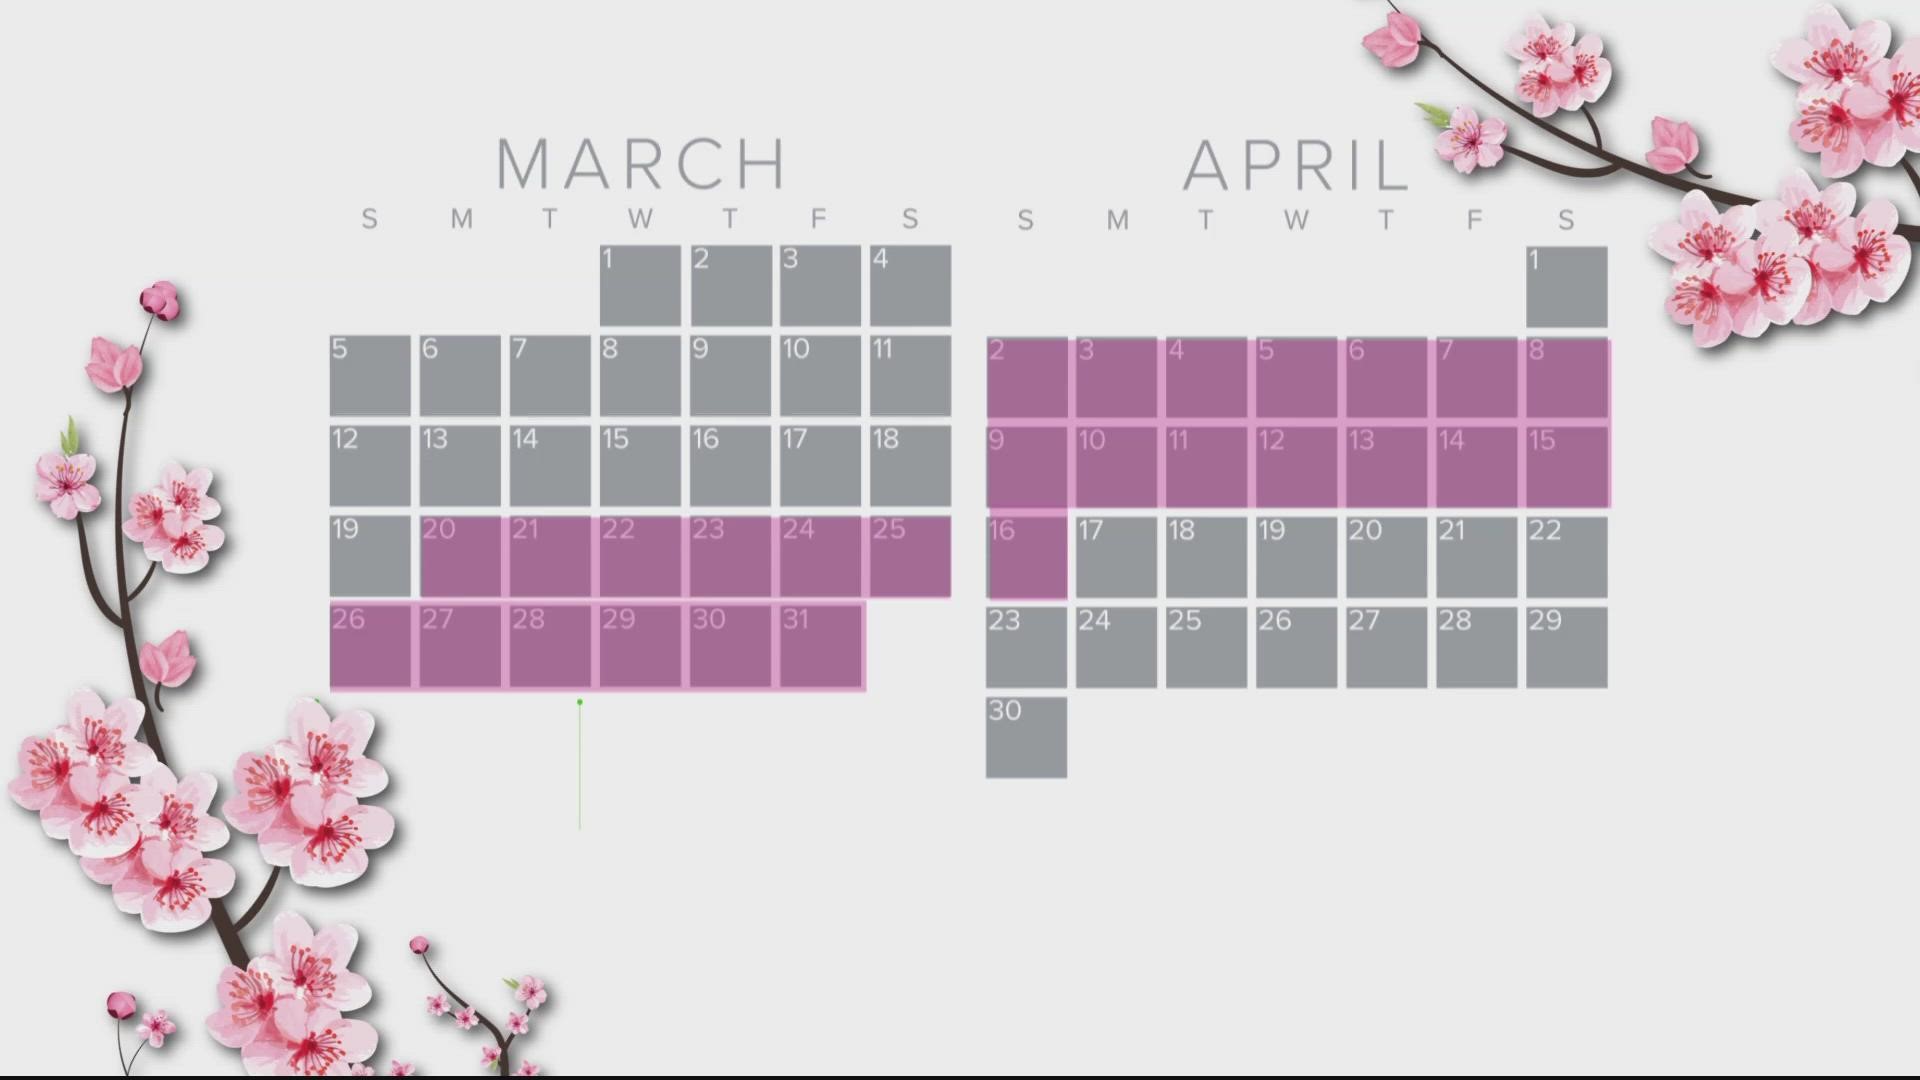 Cherry blossom in DC to reach peak bloom March 2225